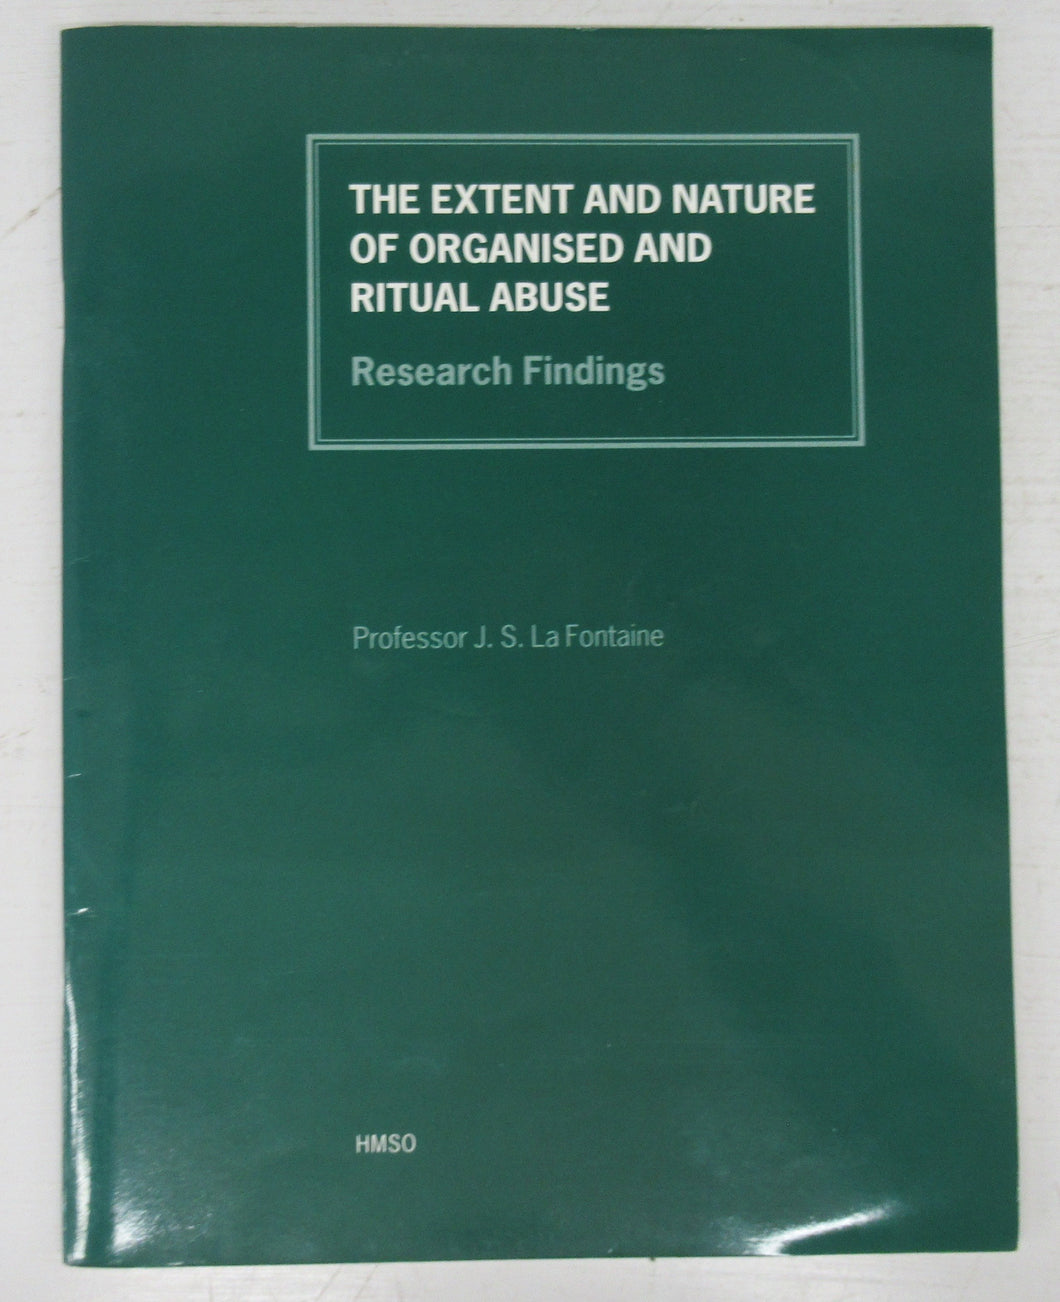 The Extent and Nature of Organised and Ritual Abuse: Research Findings